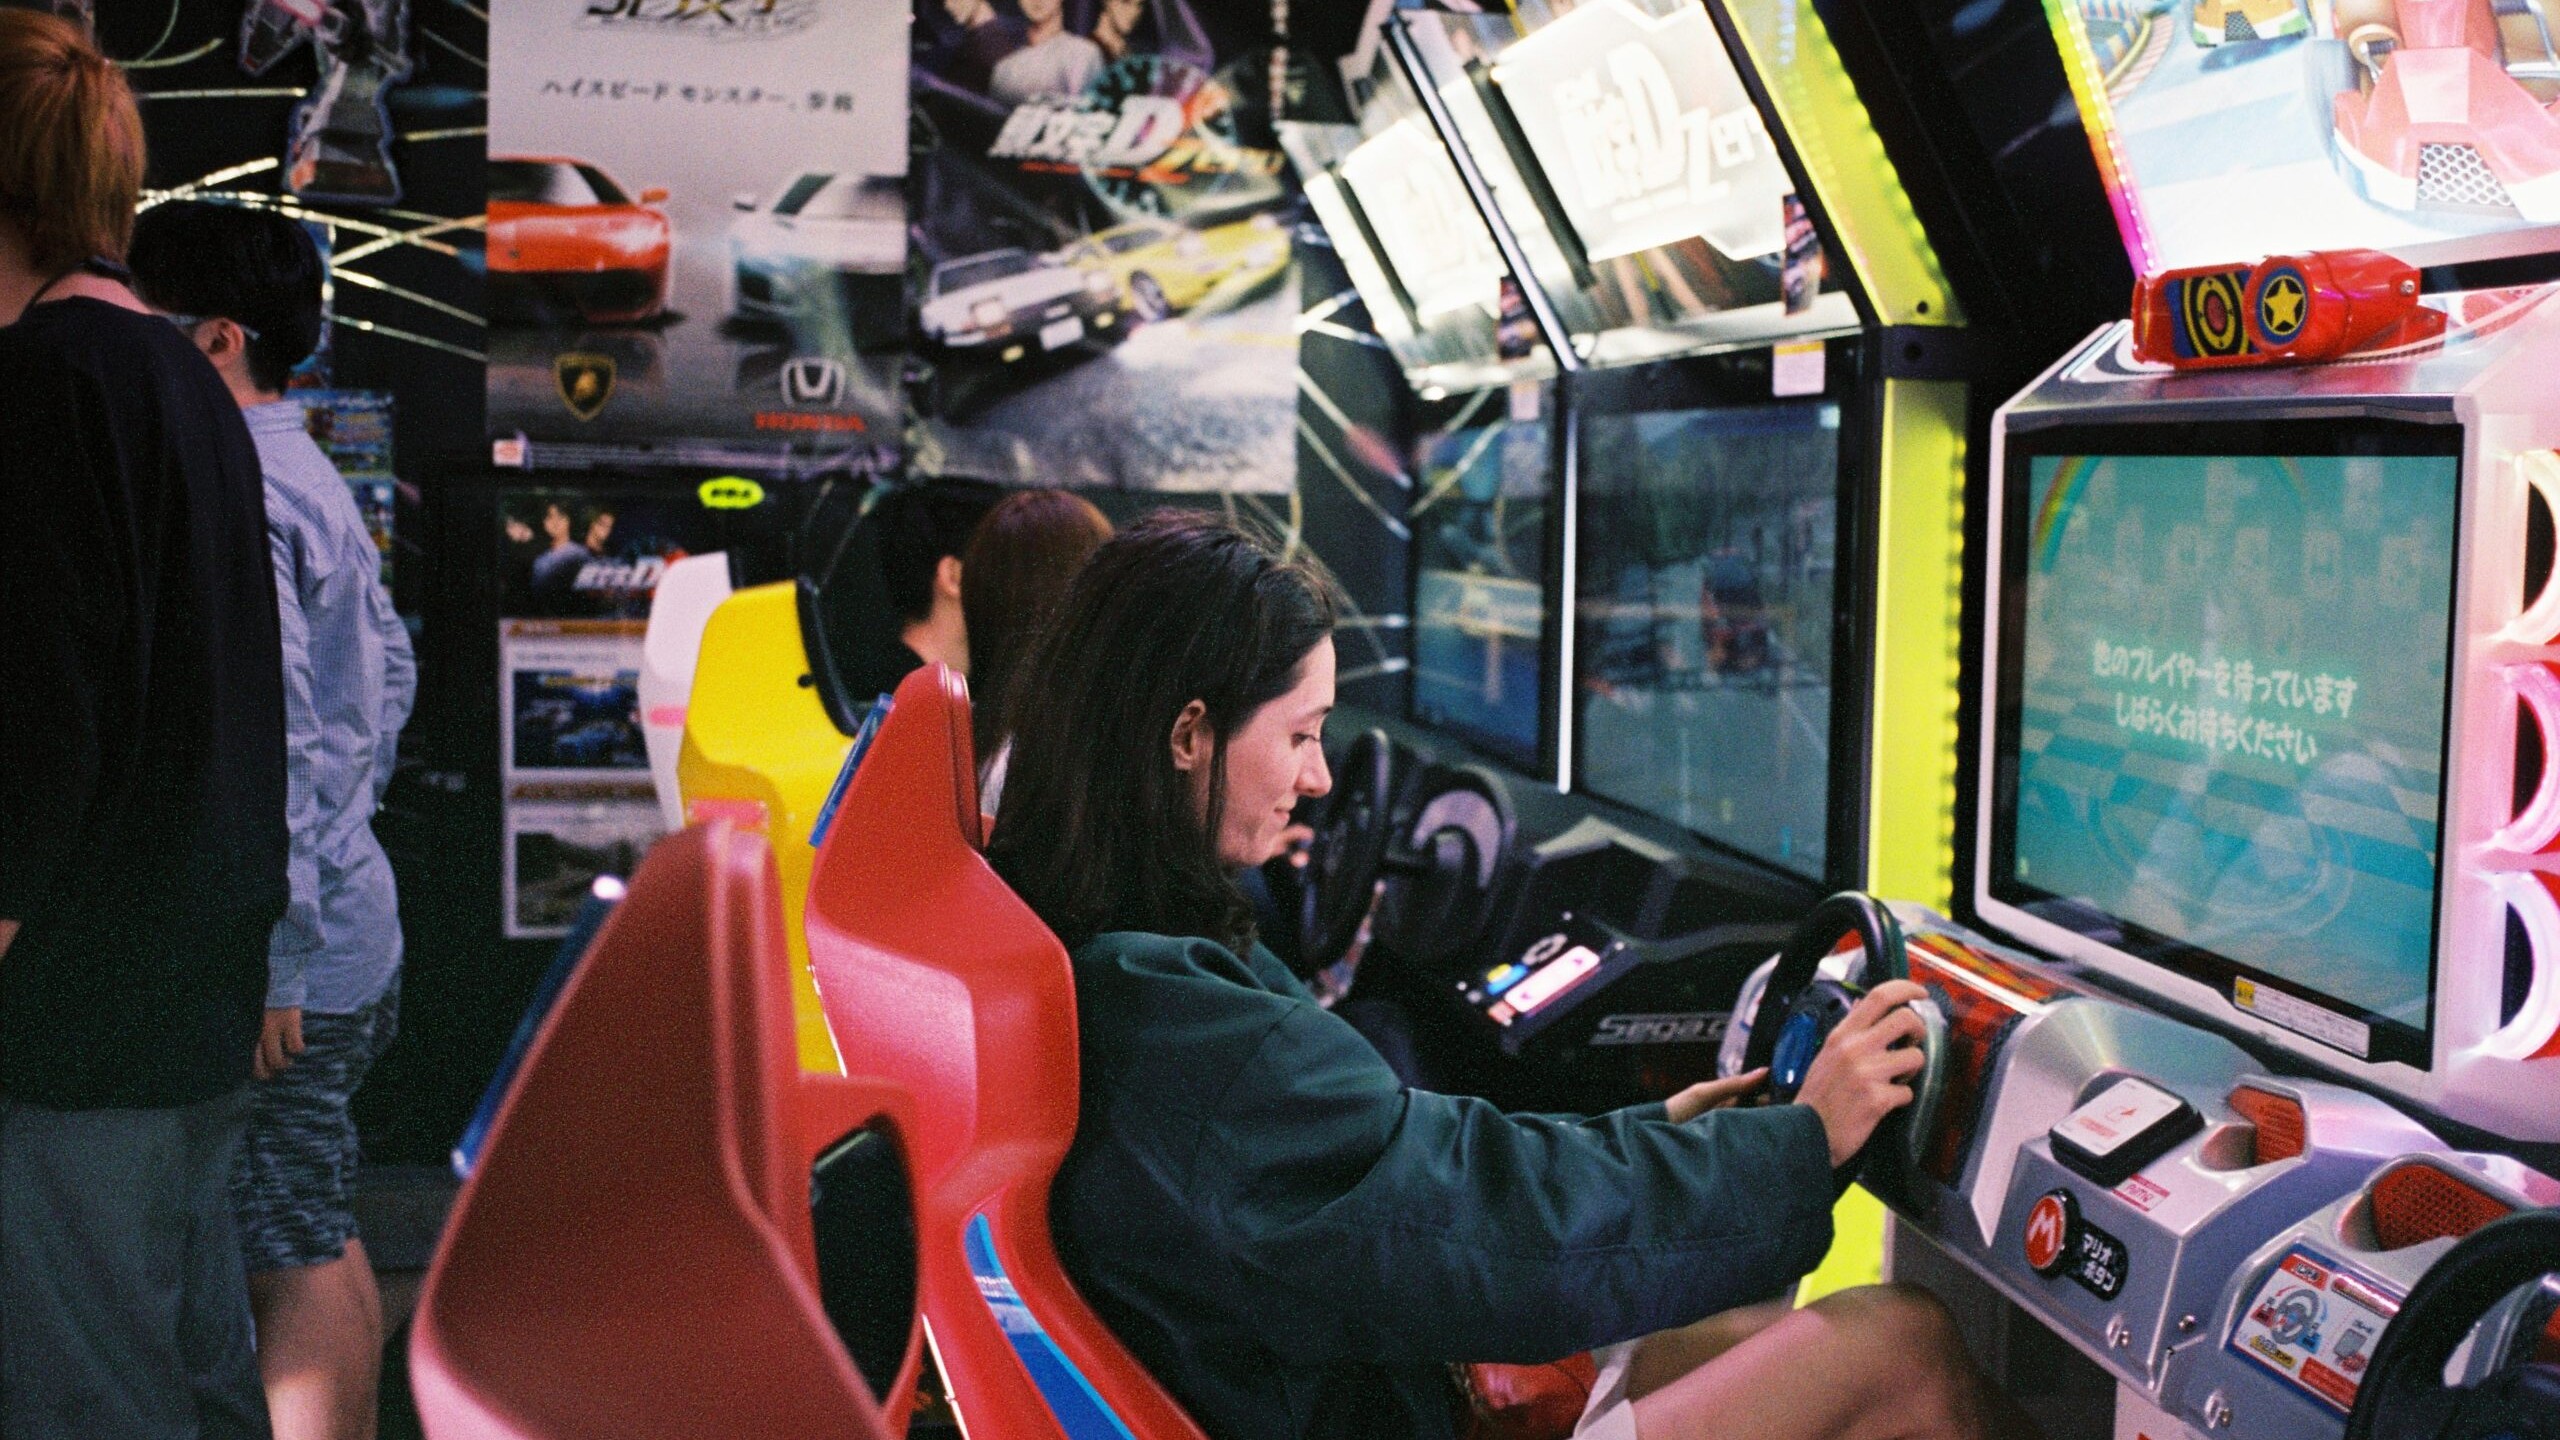 Girl smiling as she plays a Mario Cart arcade racing game at an event.